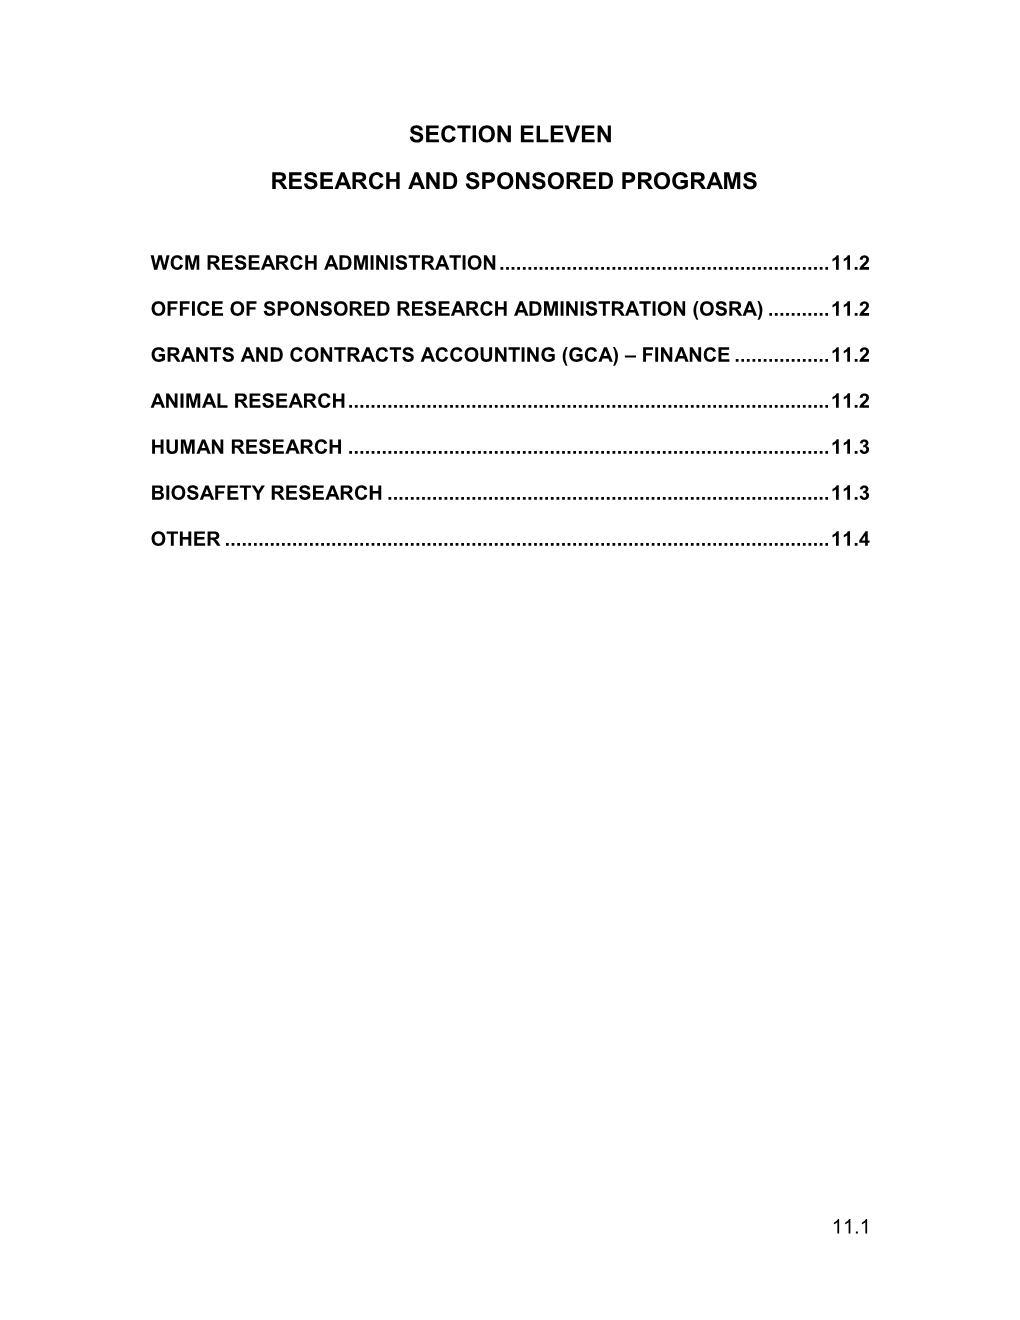 Research and Sponsored Programs